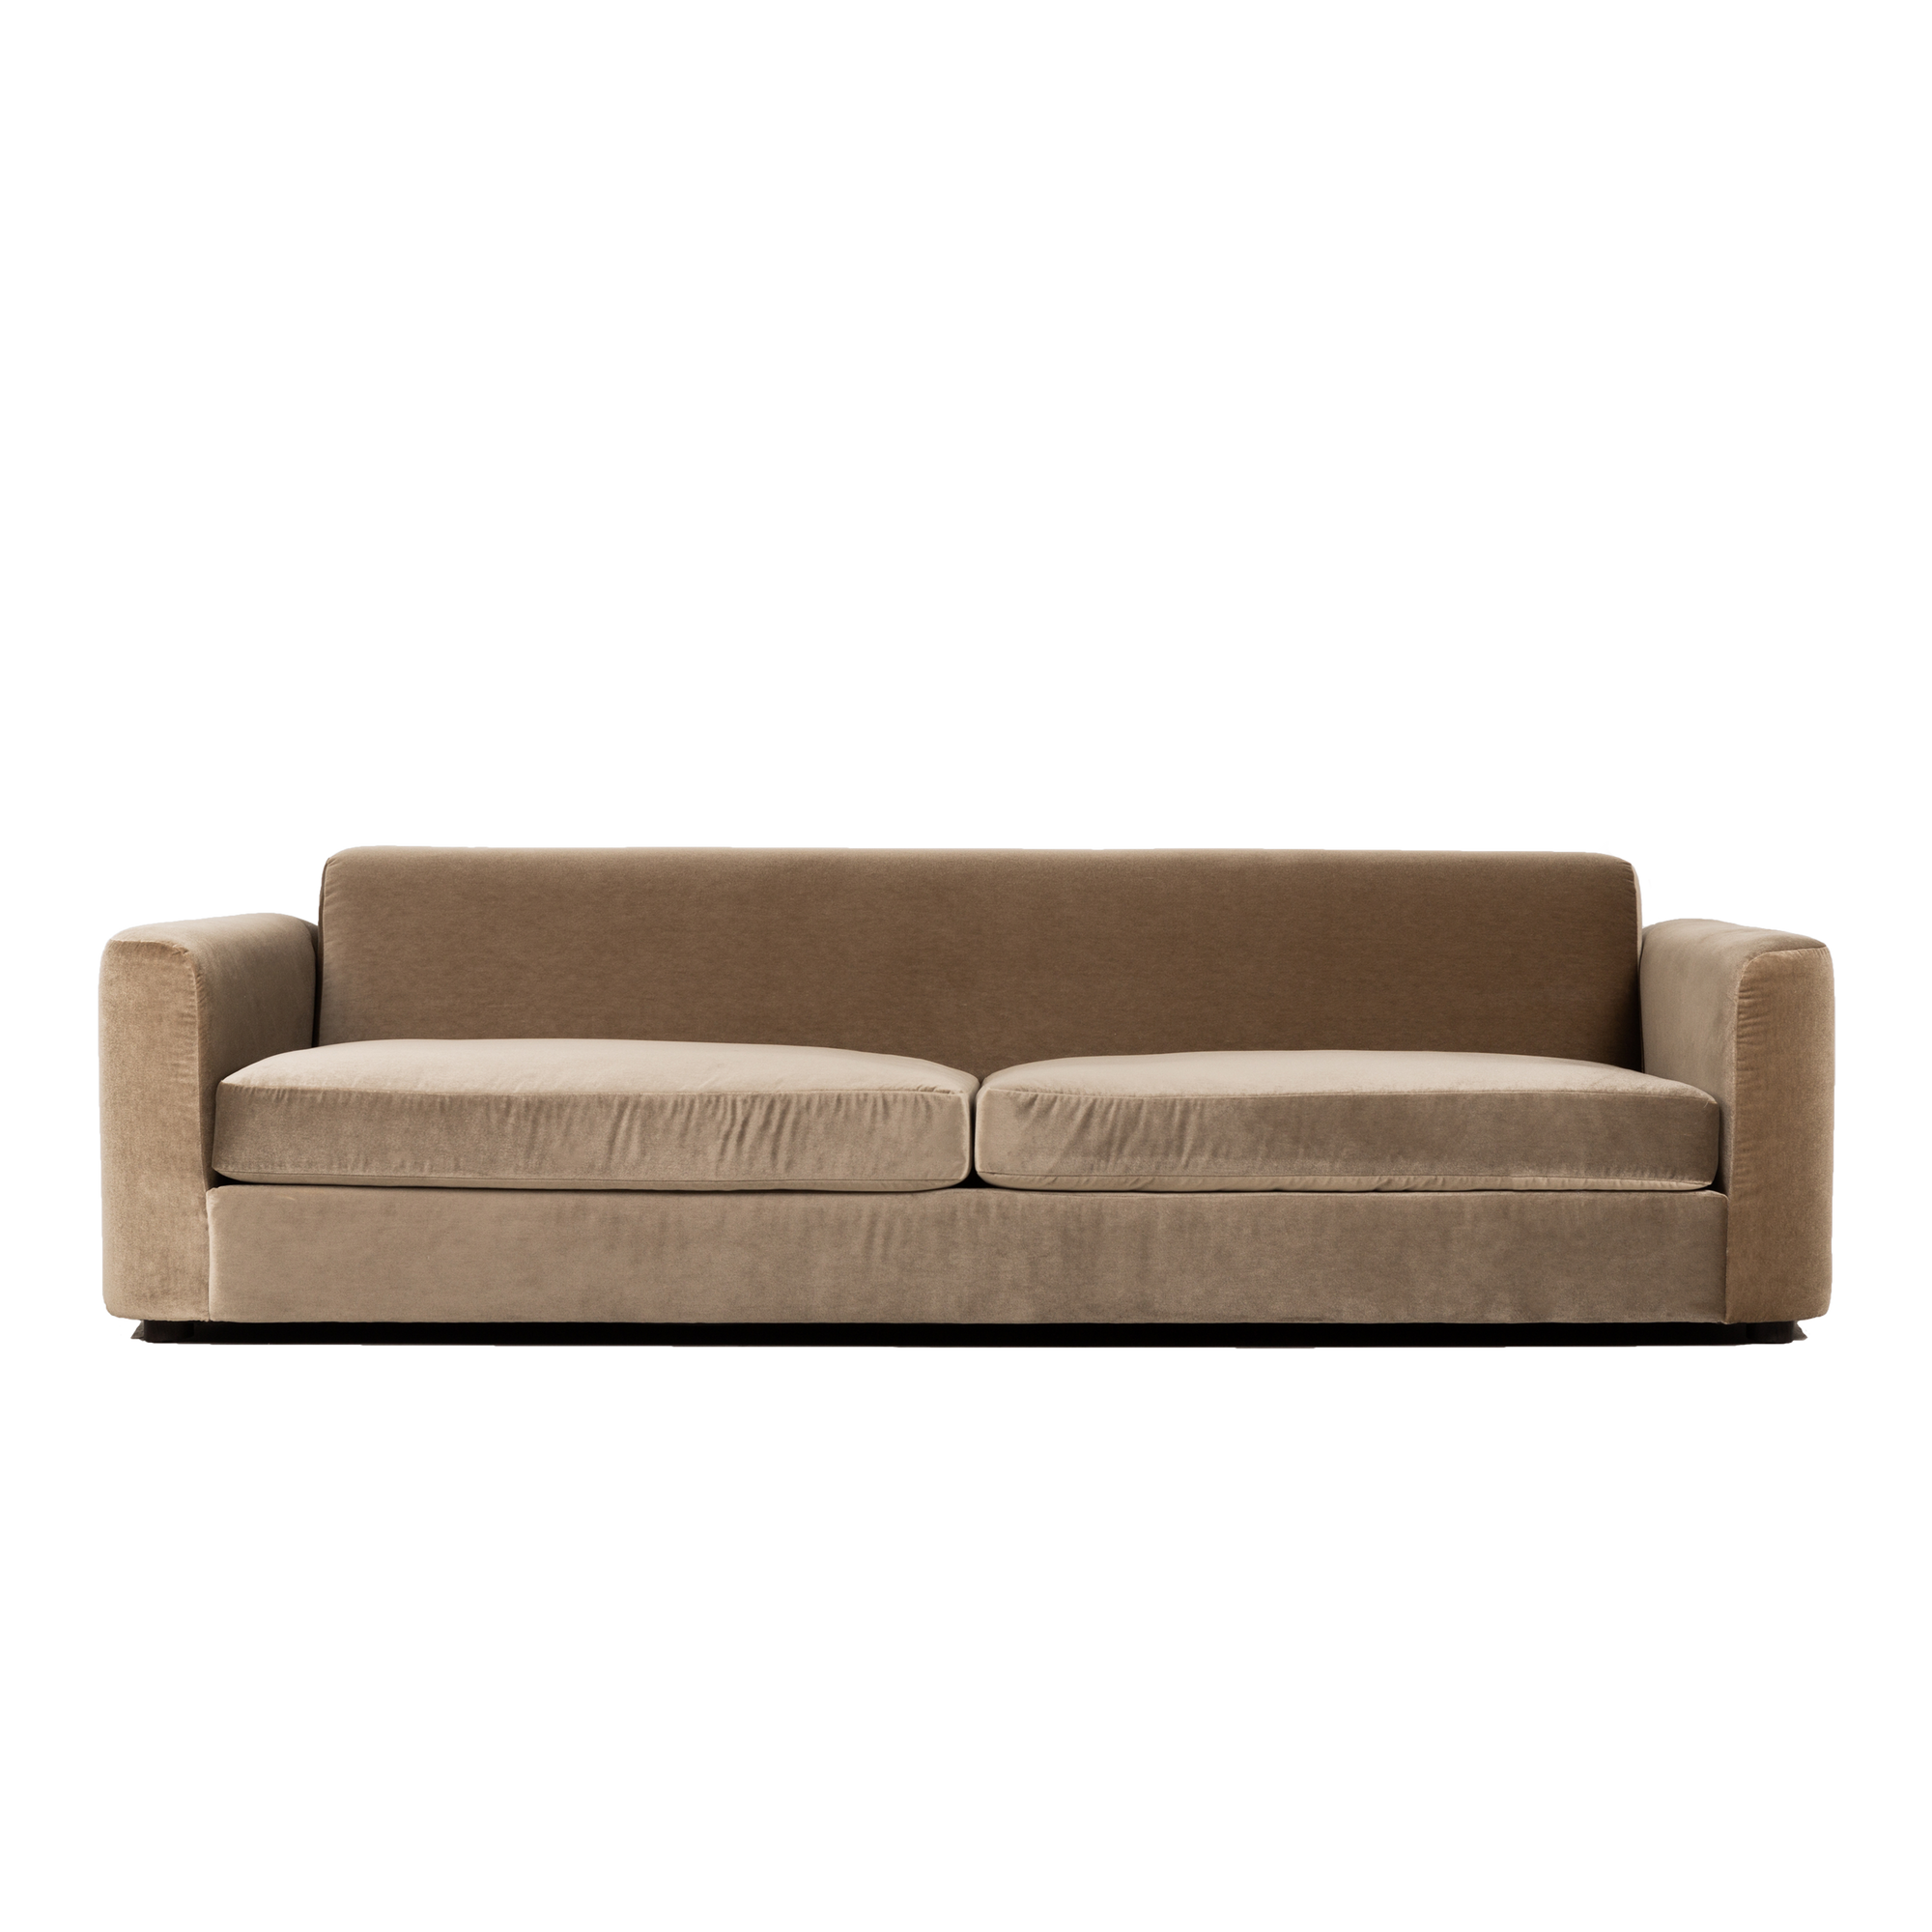 A nod to the Streamline Moderne movement, the Aero Sofa emphasizes oversized, aerodynamically inspired curves and graceful horizontal lines.